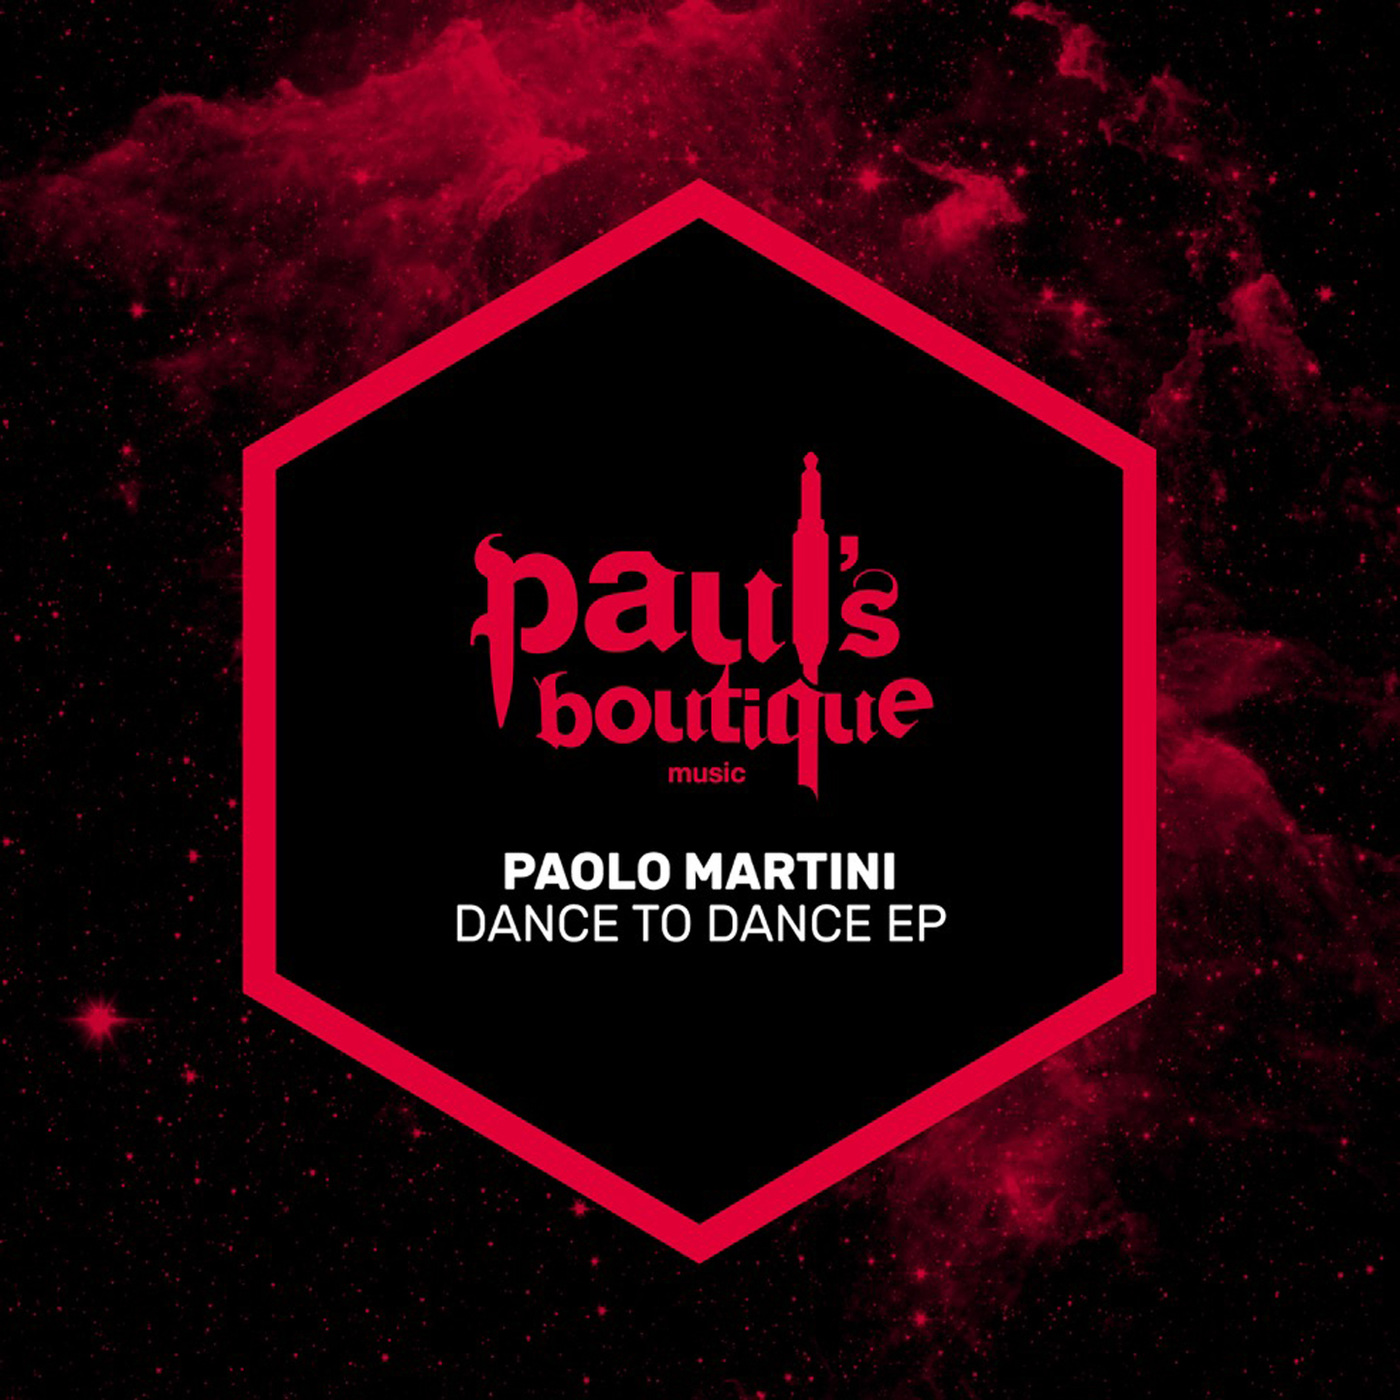 Paolo Martini - Dance To Dance EP / Paul's Boutique